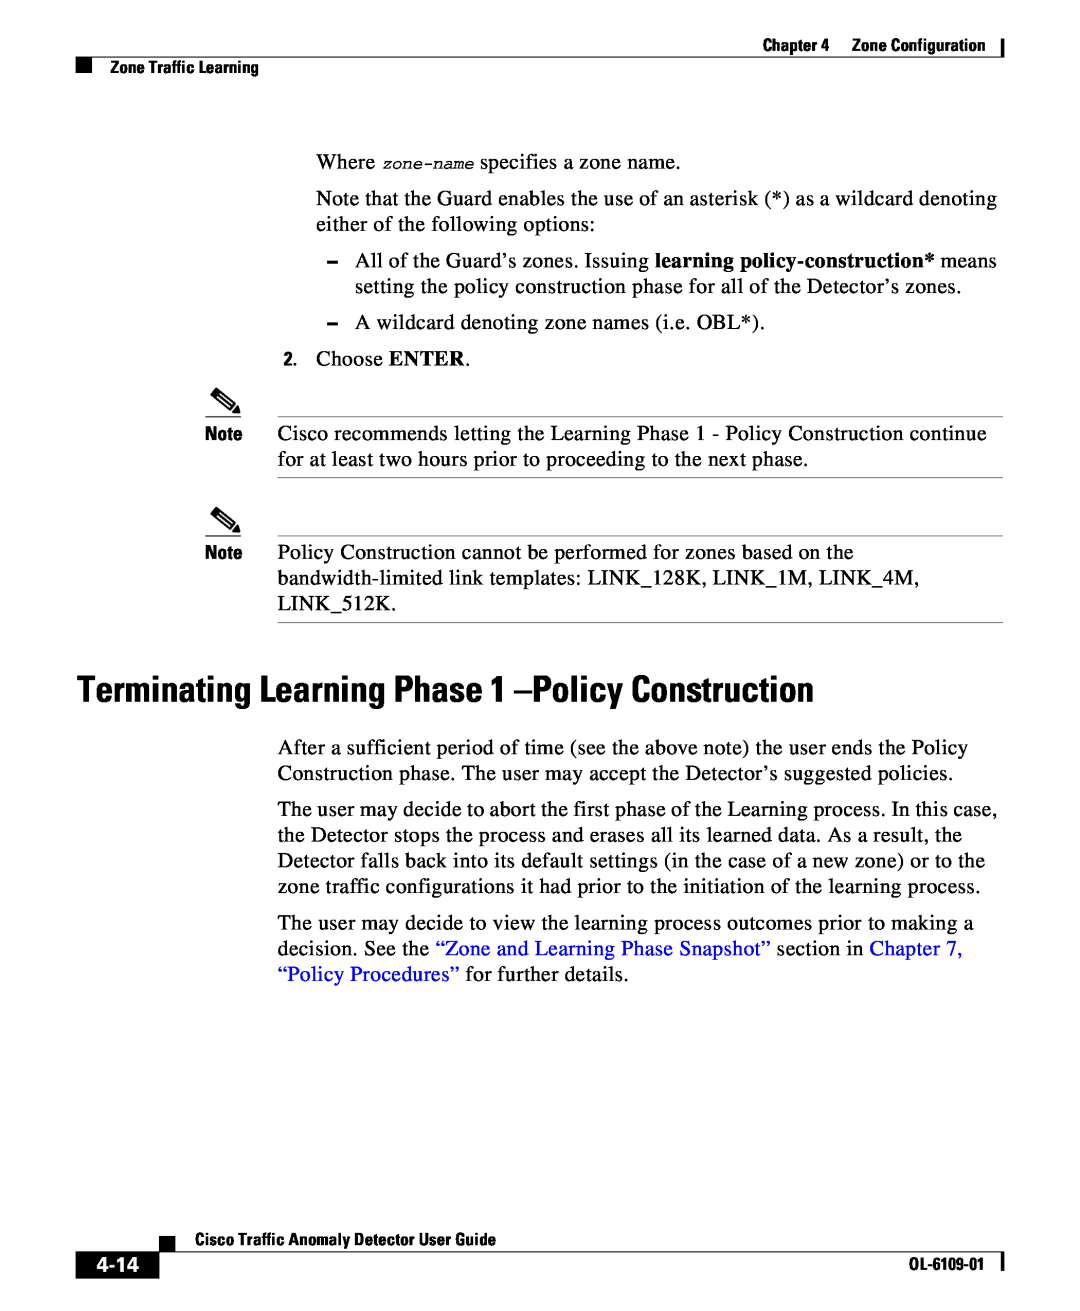 Cisco Systems OL-6109-01 manual Terminating Learning Phase 1 -Policy Construction, 4-14 